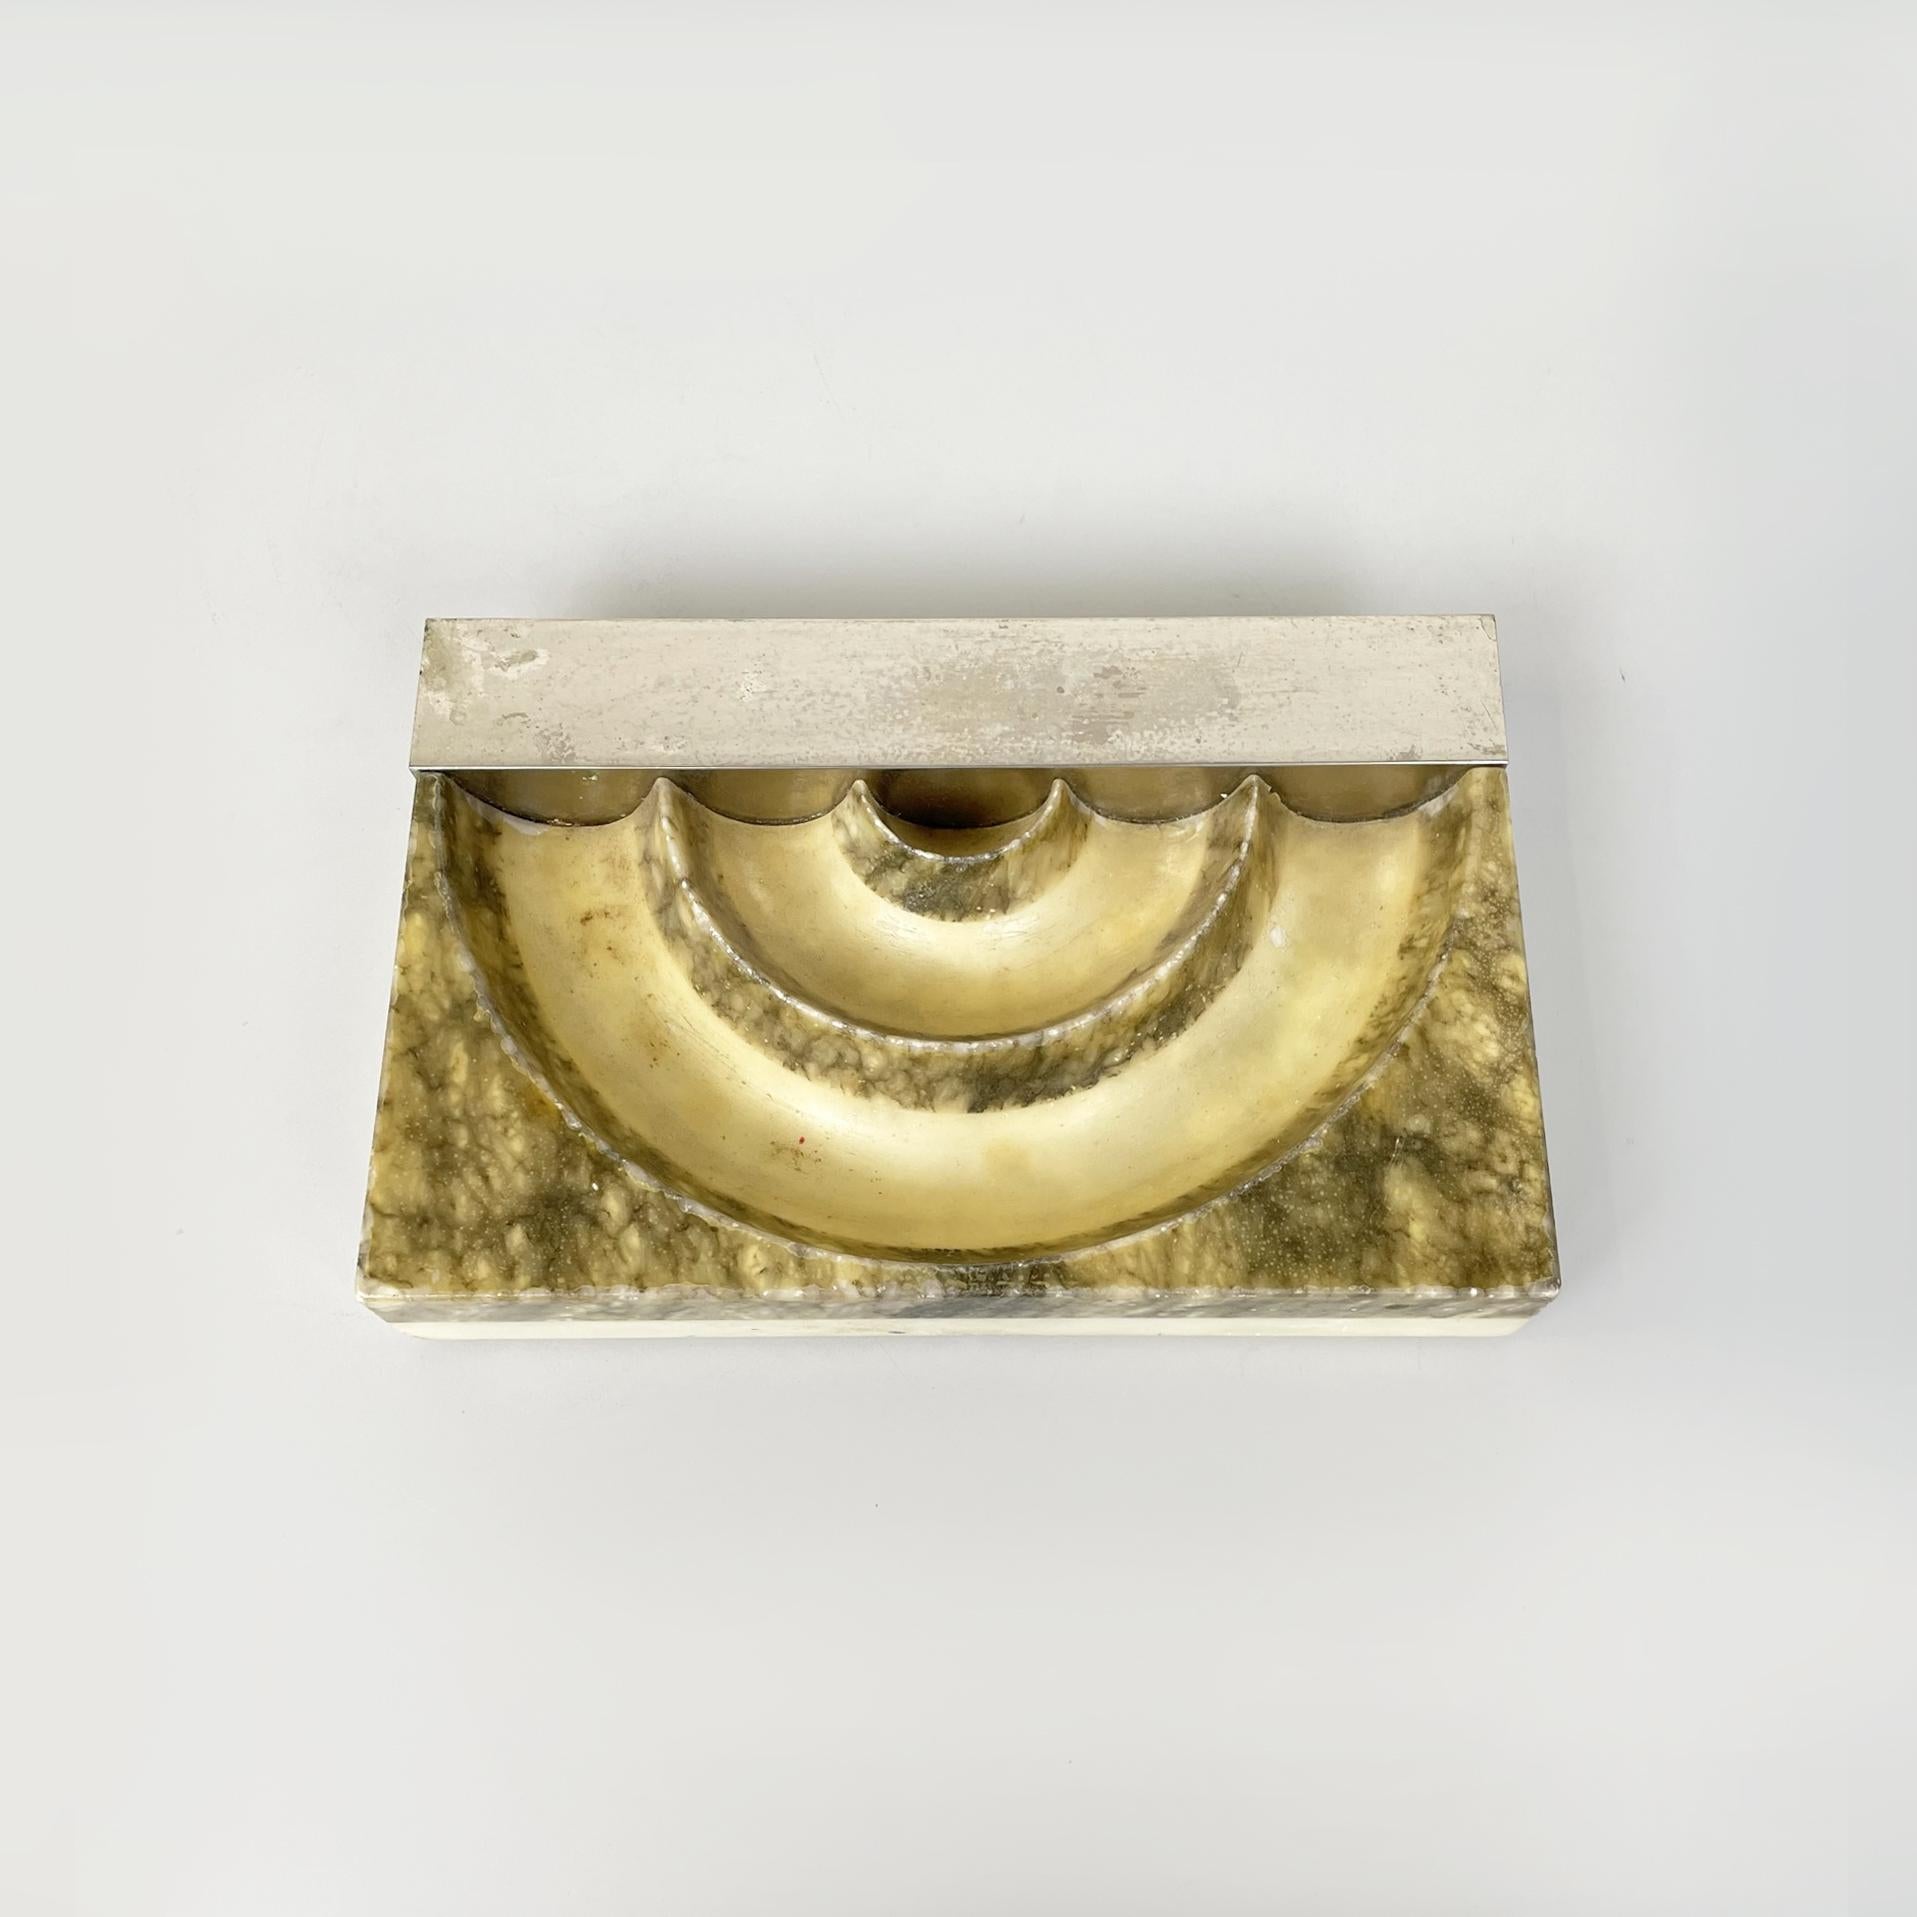 Italian Mid-Century Modern Rectangular ashtray in marble and steel, 1960s
Rectangular base ashtray in marble and steel. On the front it has three grooves in the shape of a semicircle, where it is possible to extinguish the cigarette. On the back it